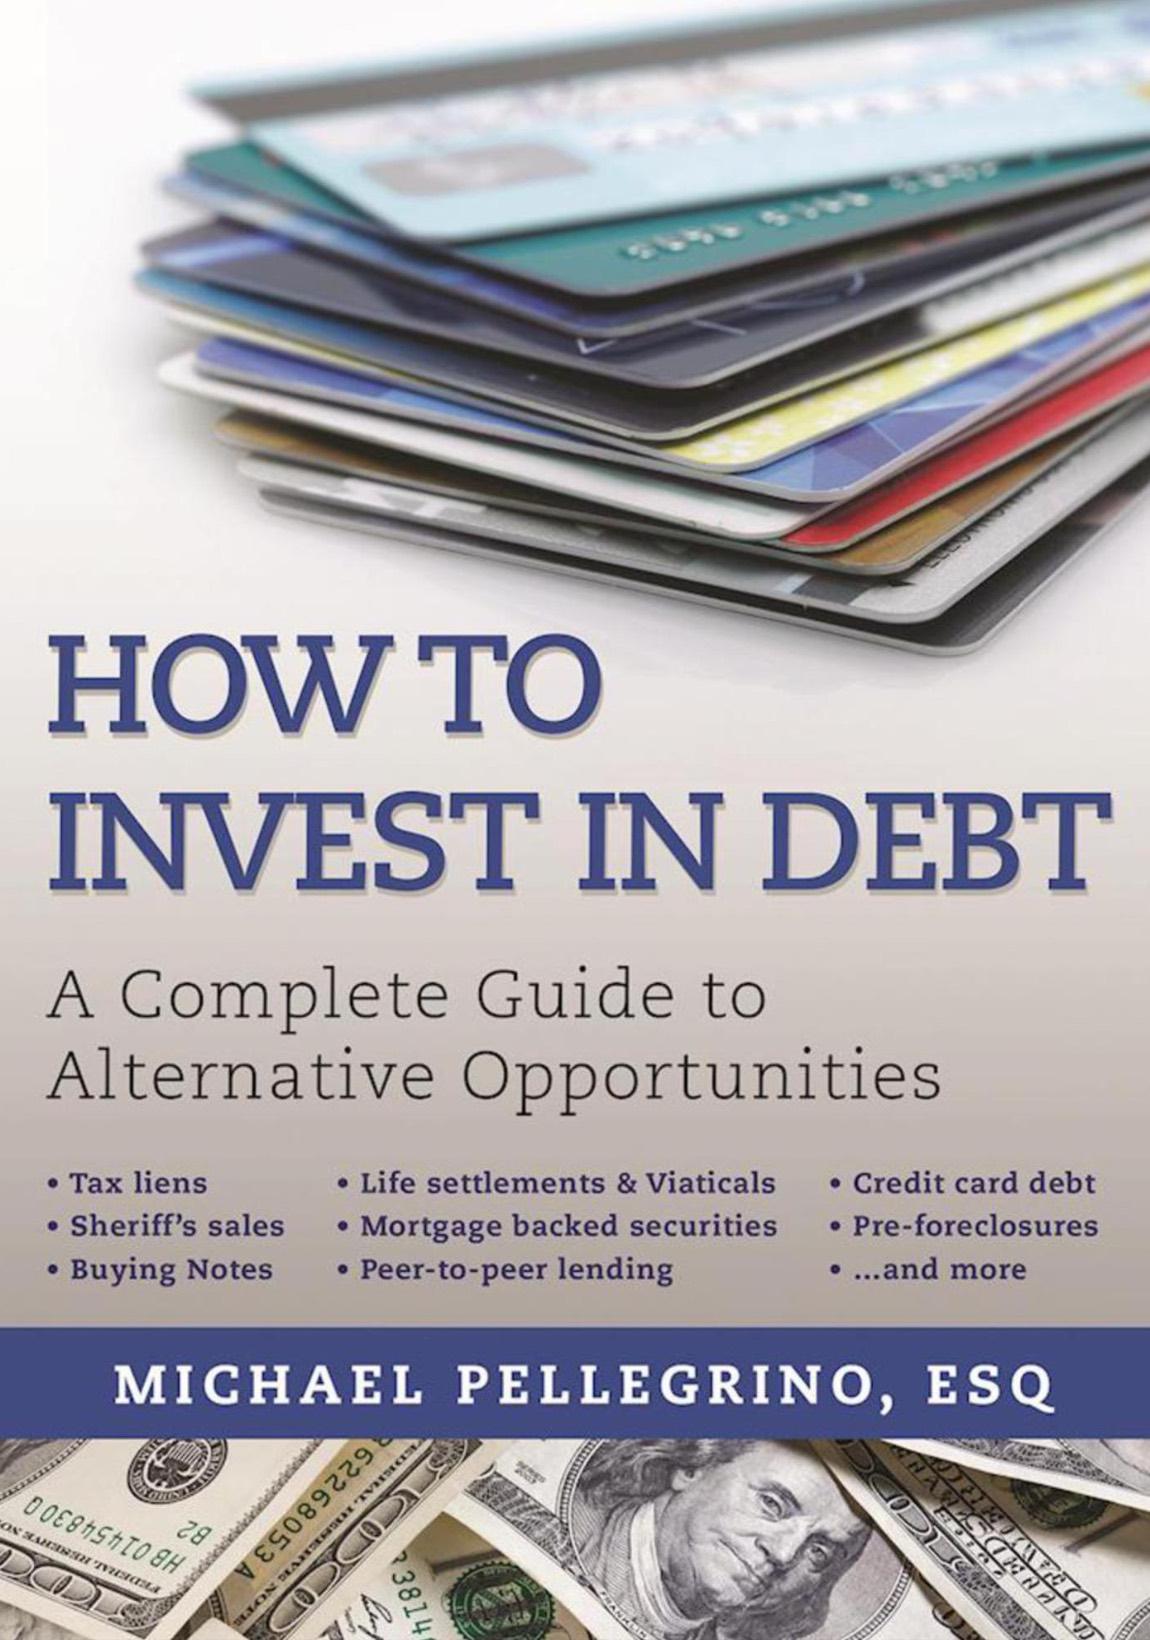 PF book3 how to invest in debt